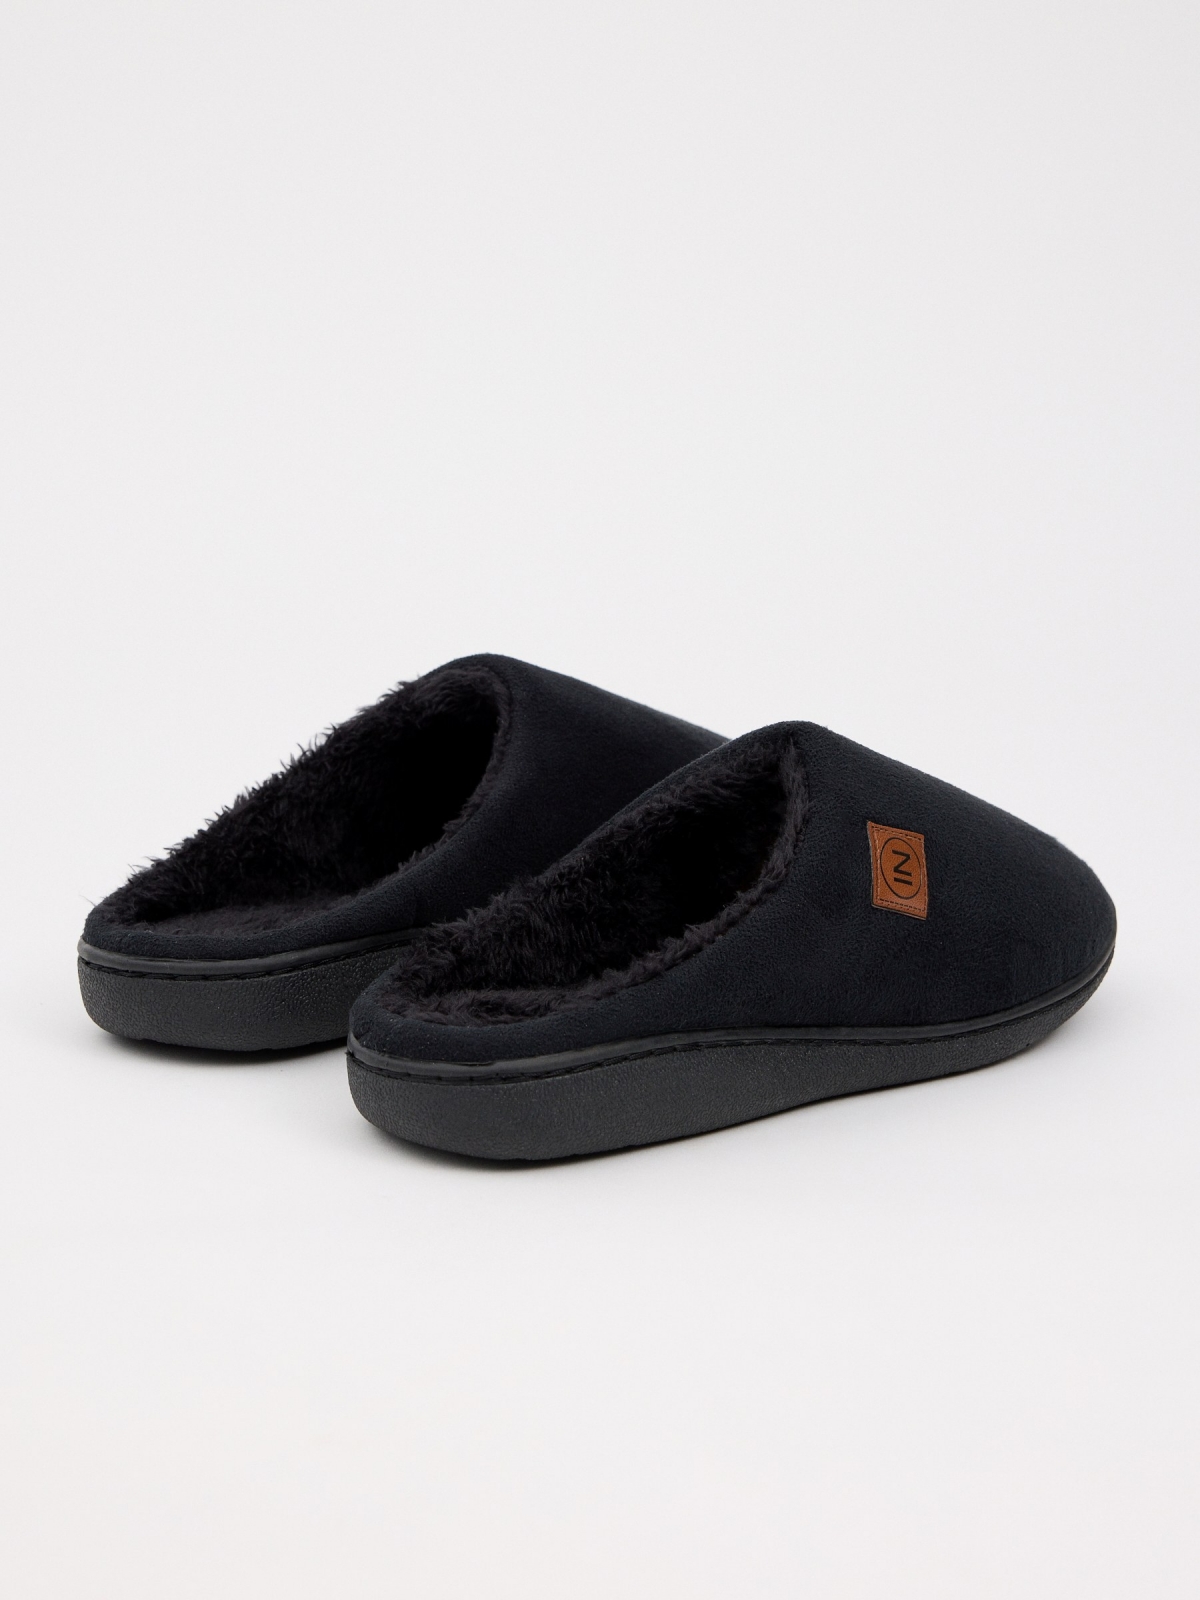 Black home slippers black front view